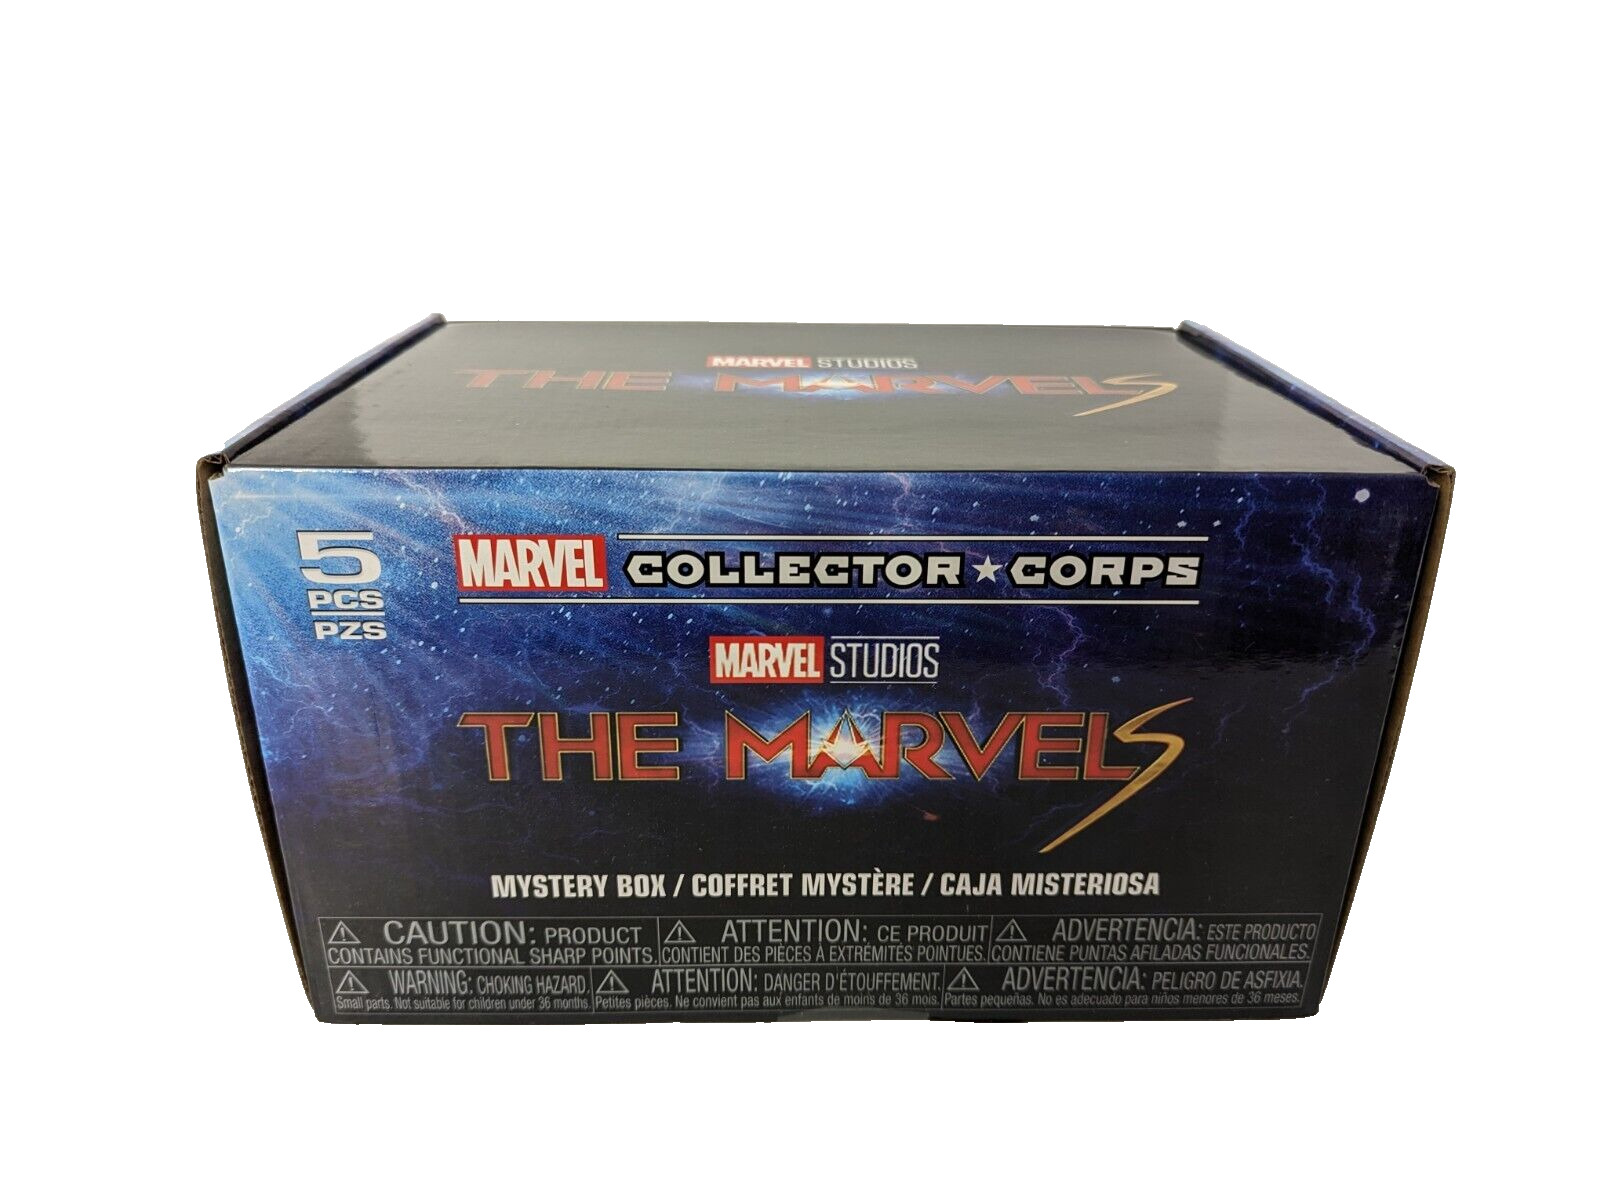 New Funko Pop The Marvels Marvel Collector Corps Box Size L